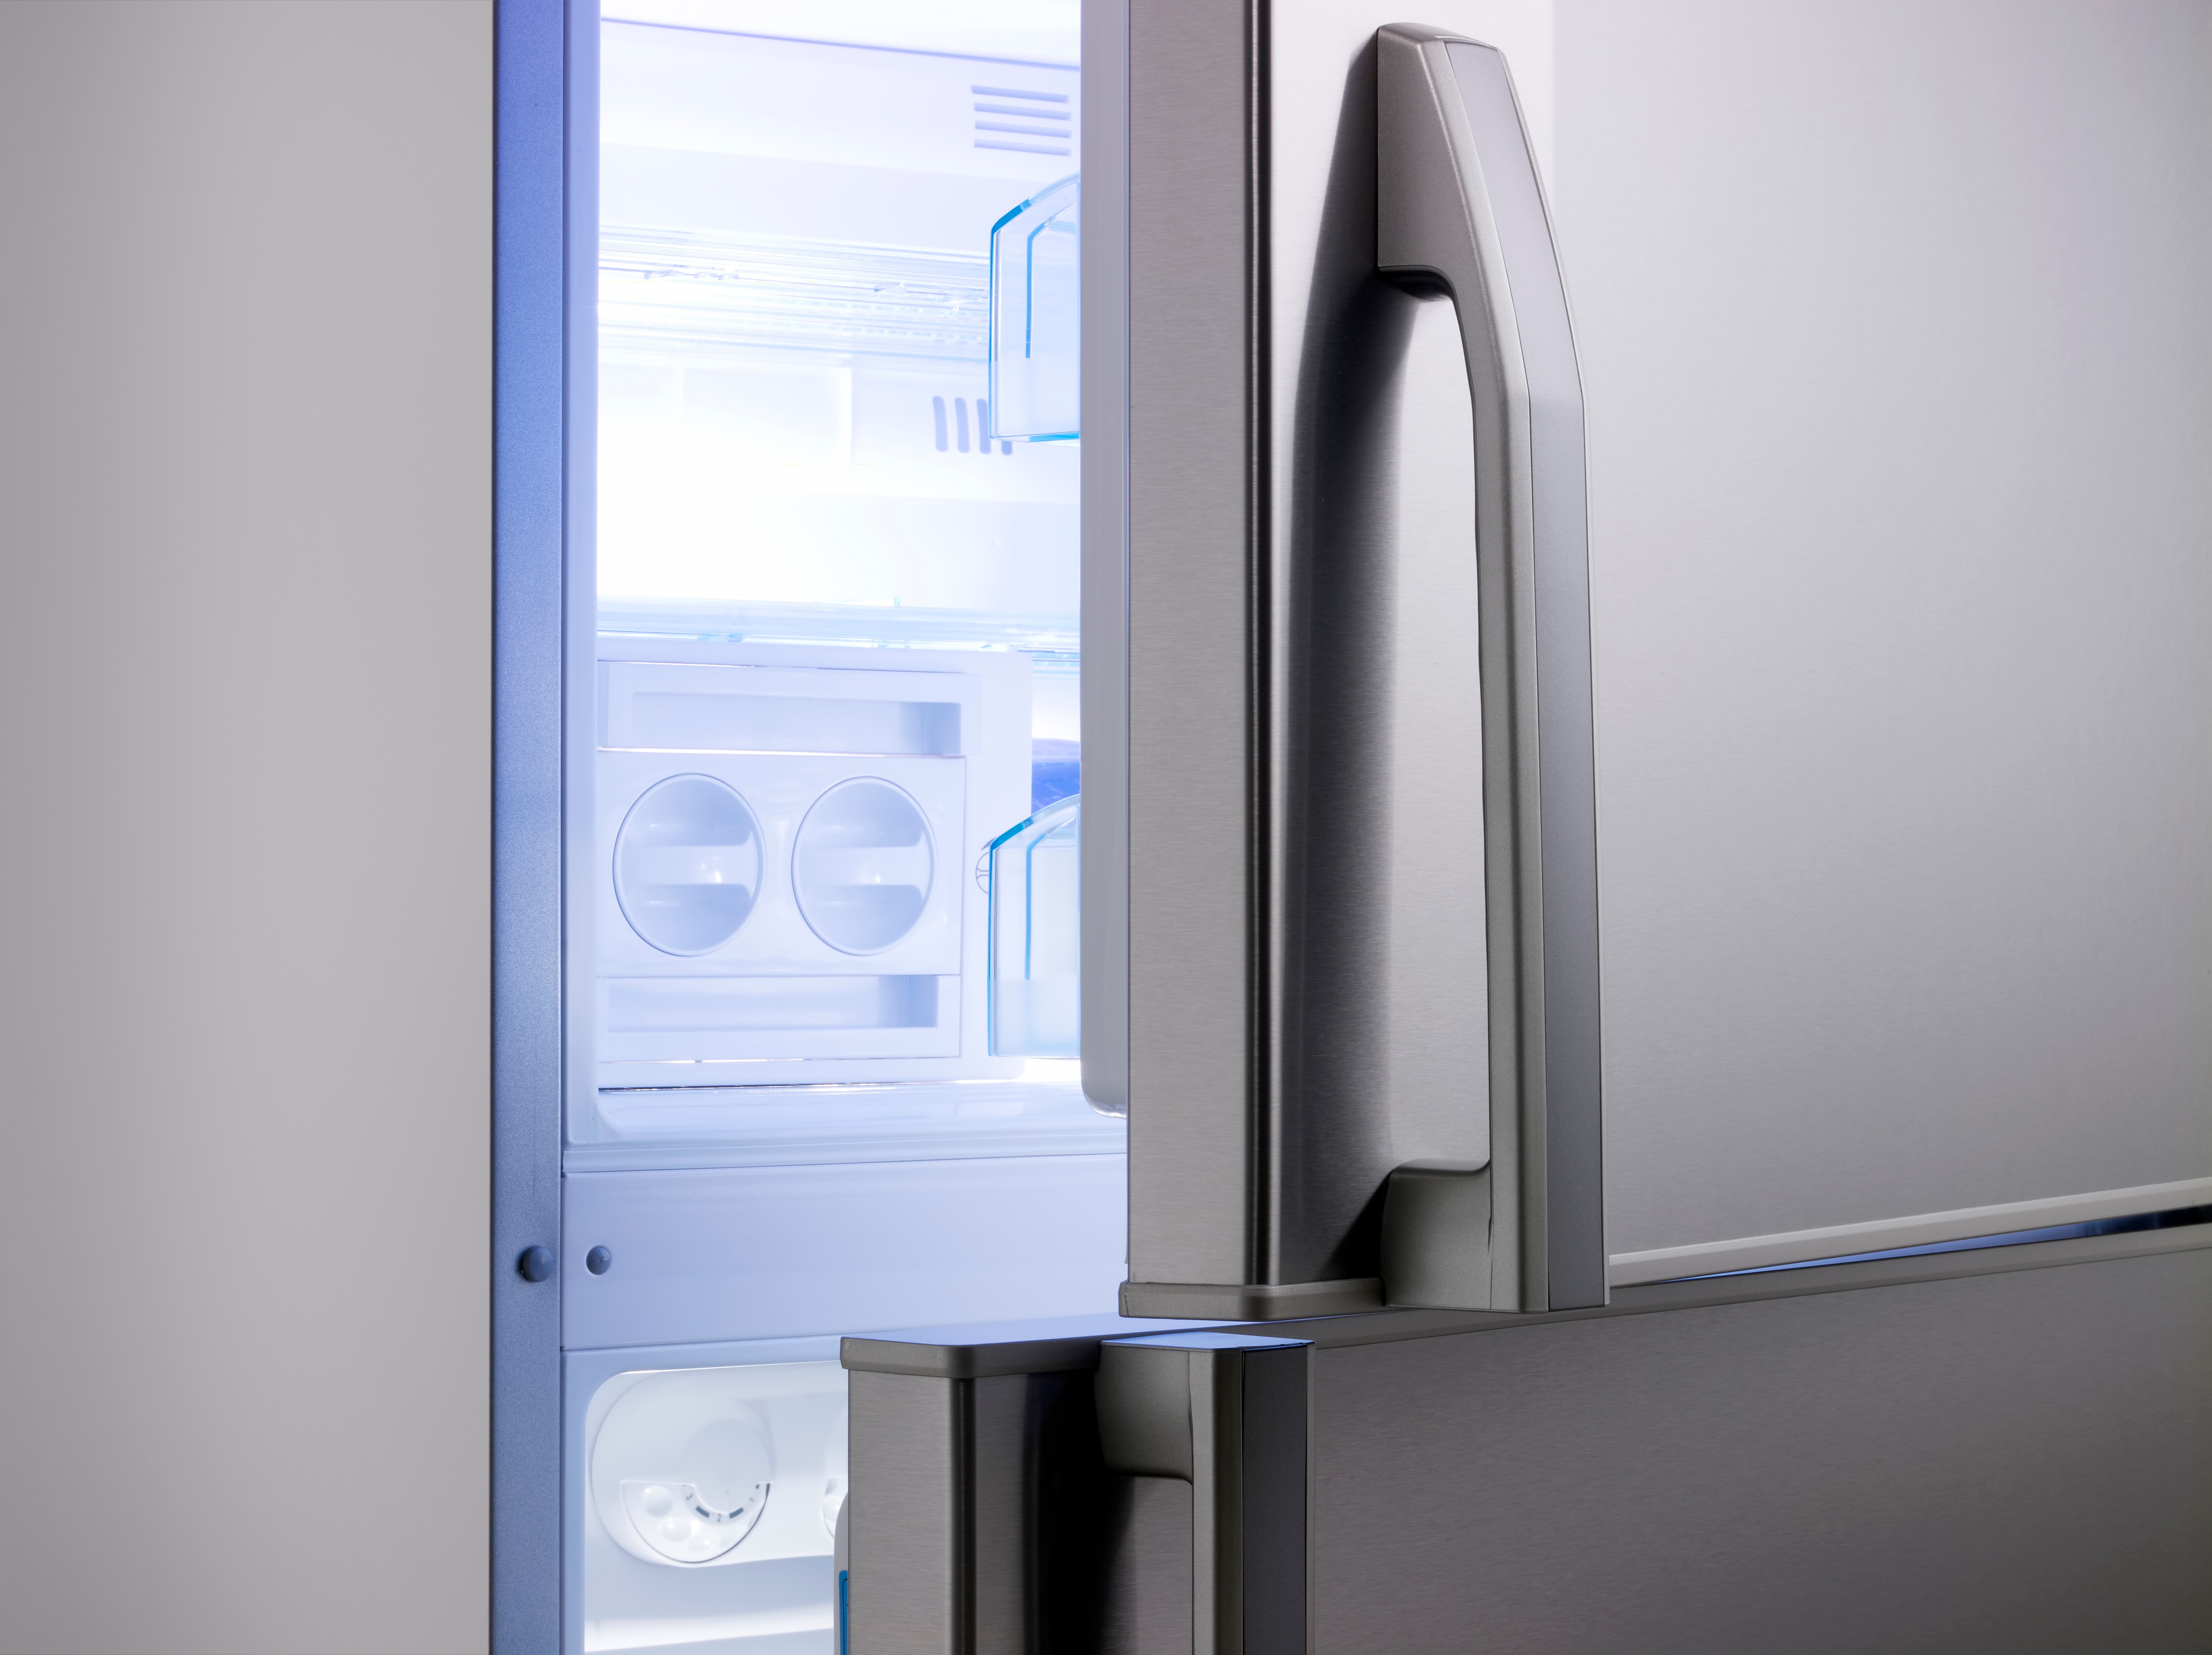 How To Remove Doors From Samsung Refrigerator